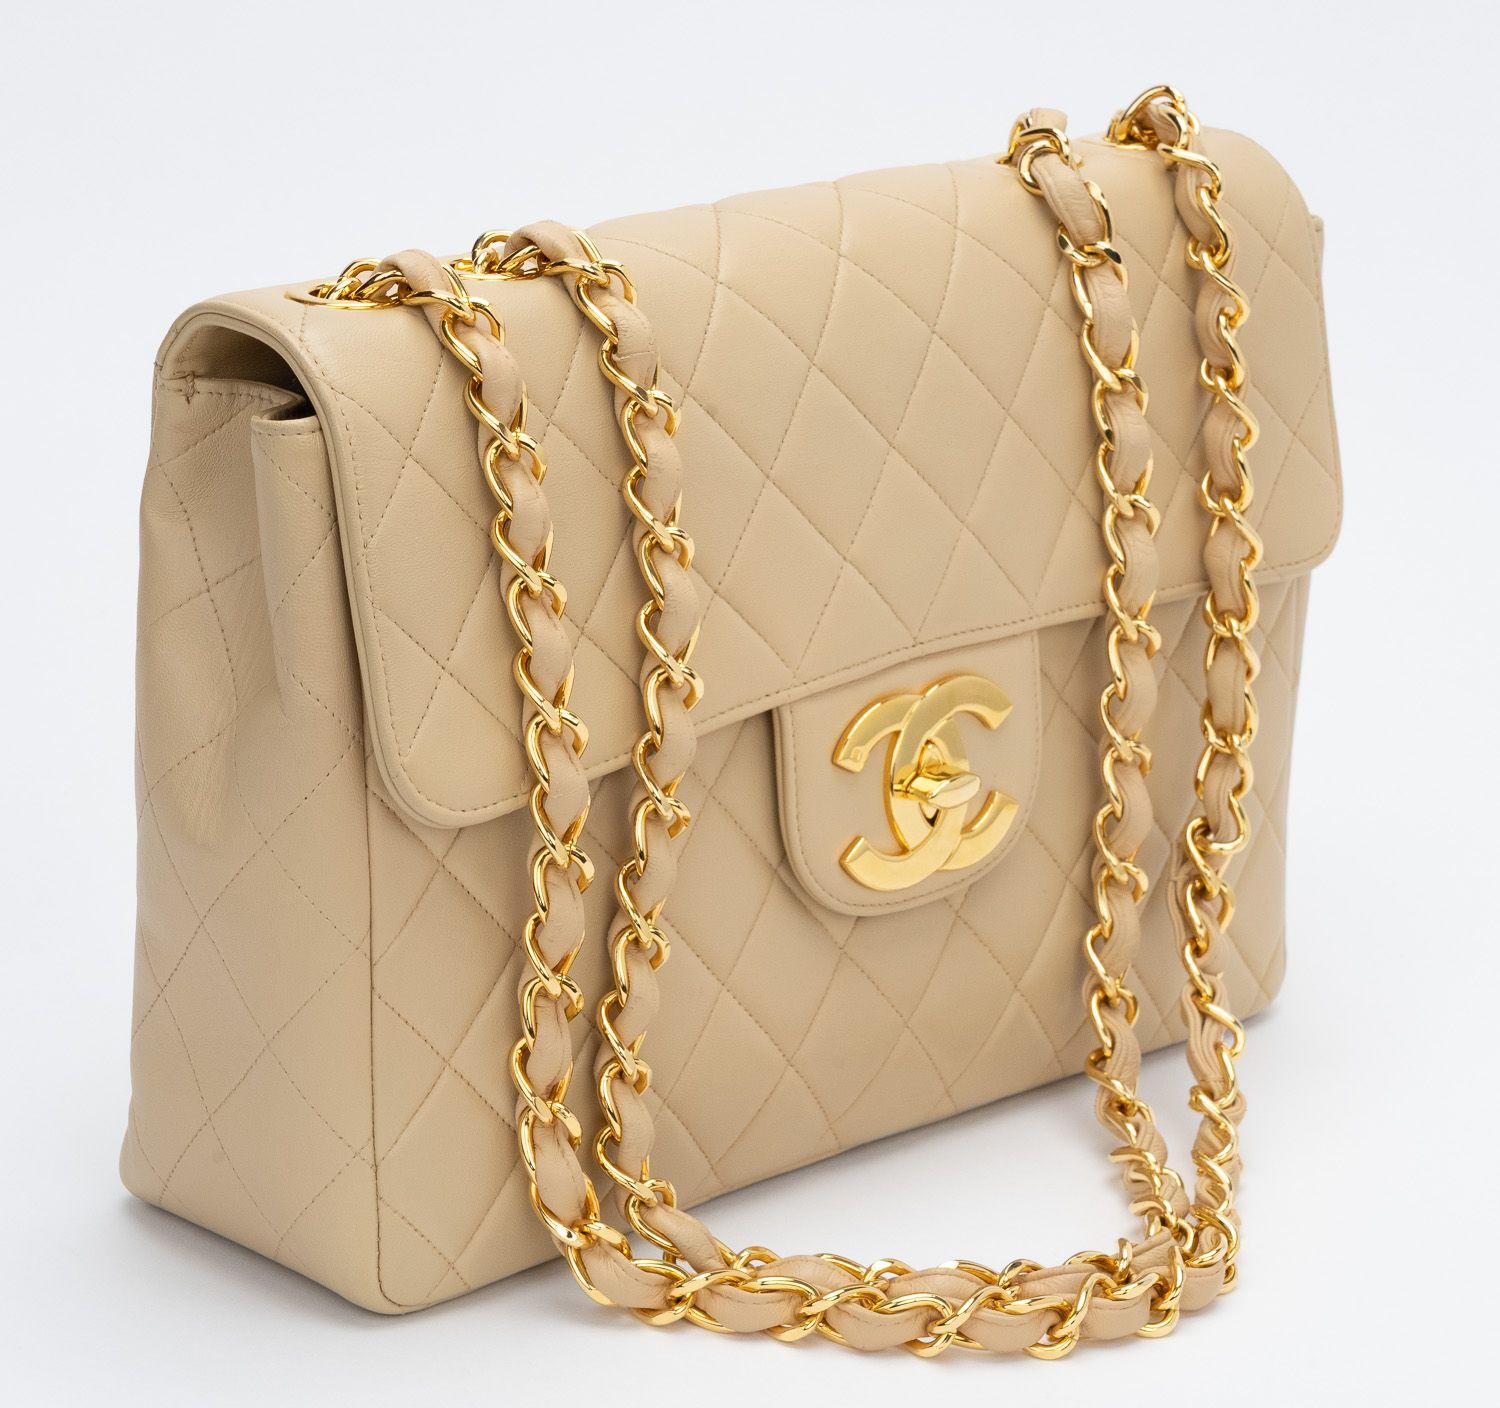 Chanel 90s jumbo beige lambskin single flap with 24kt gold plated hardware. Excellent condition. Shoulder drop 13